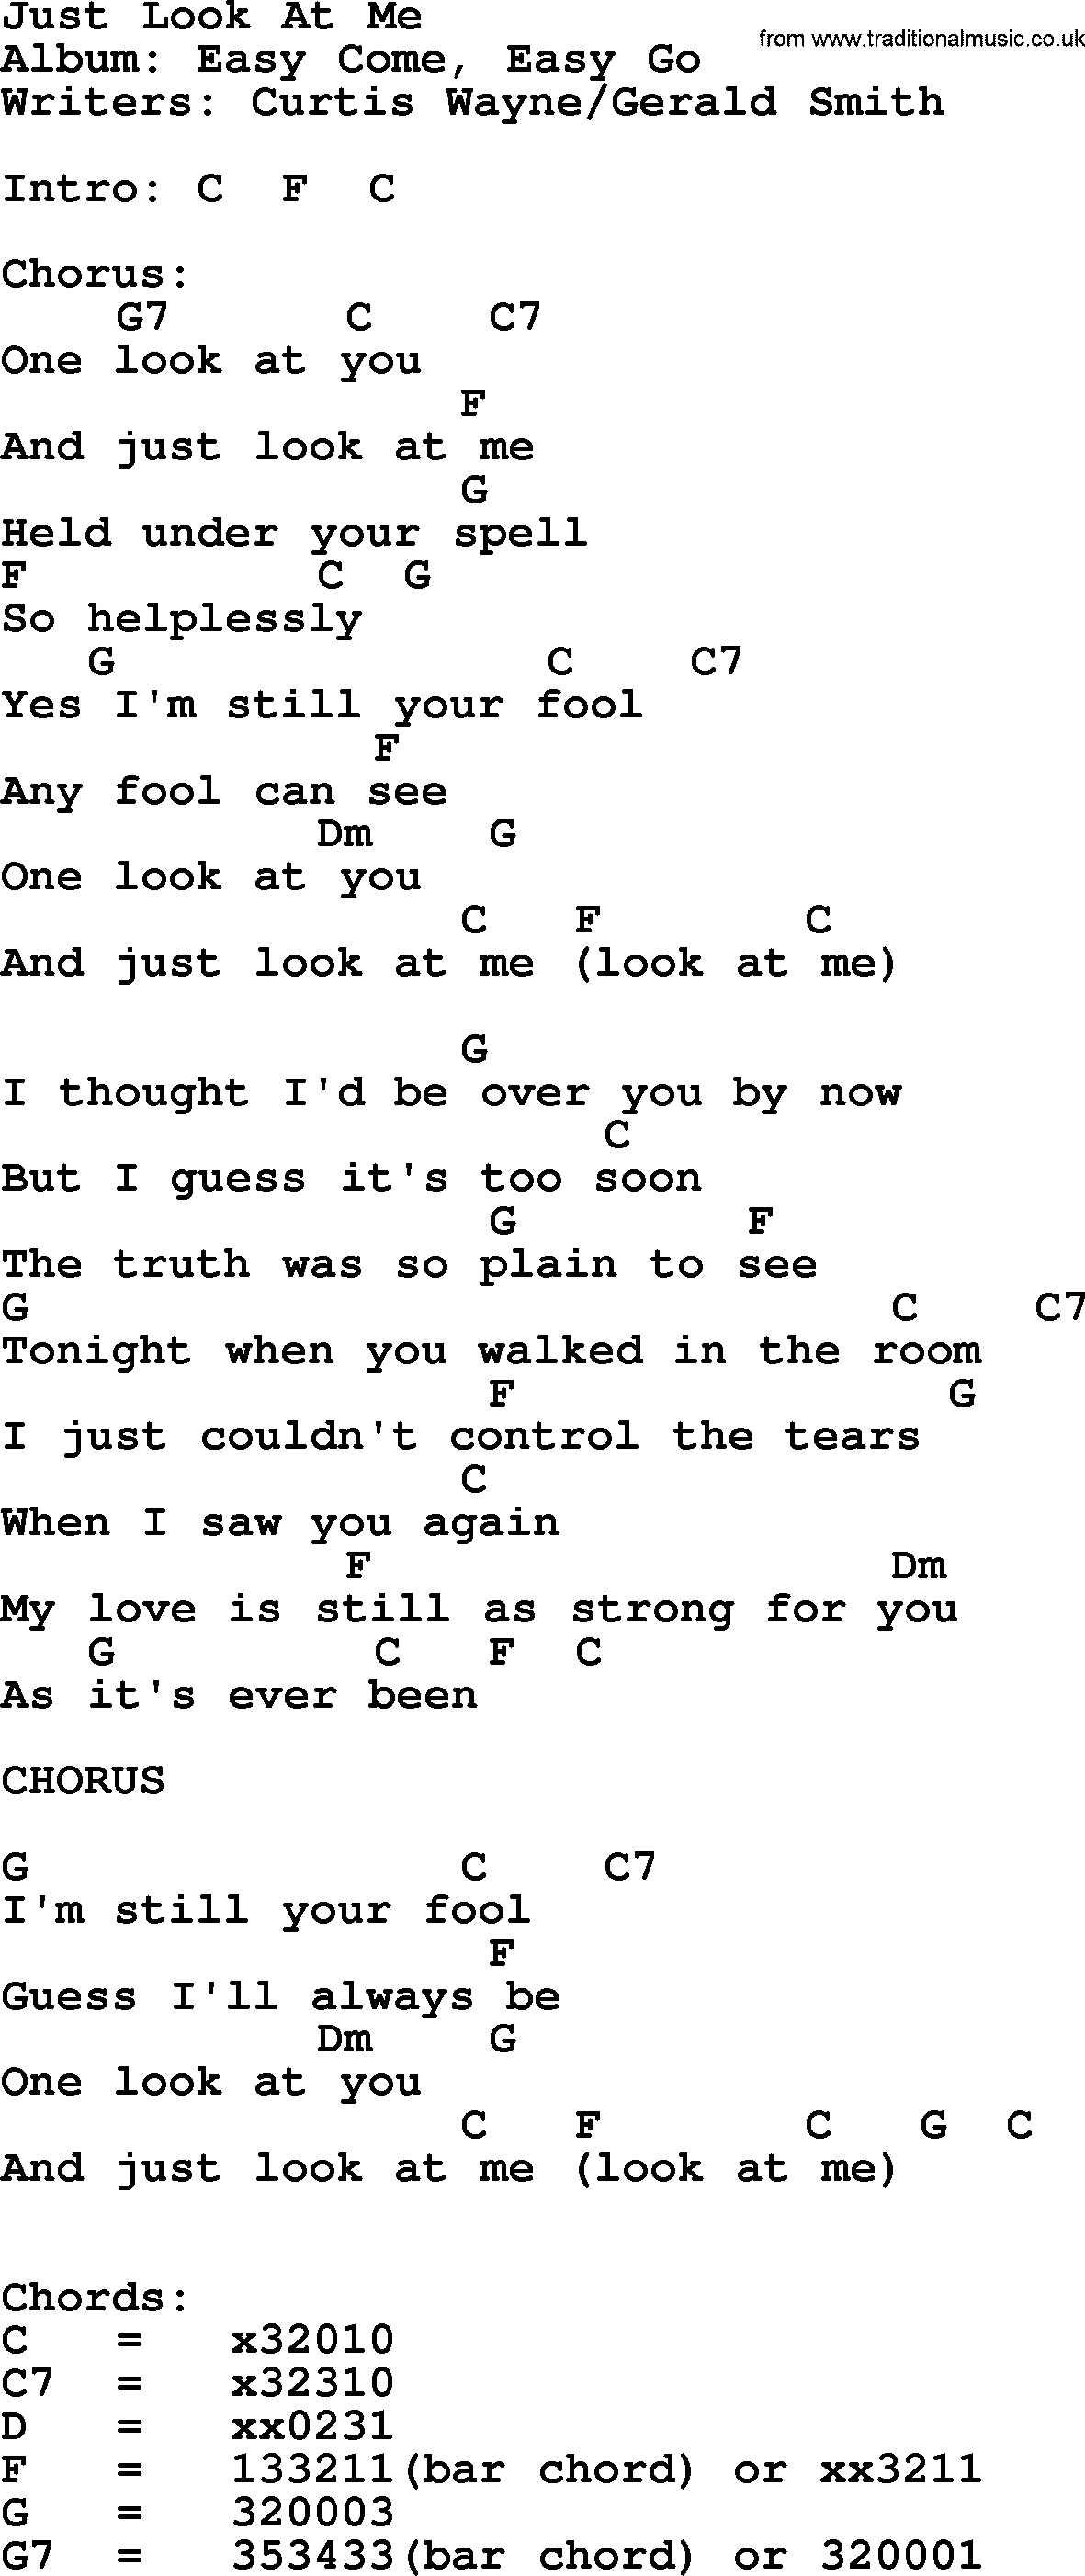 George Strait song: Just Look At Me, lyrics and chords